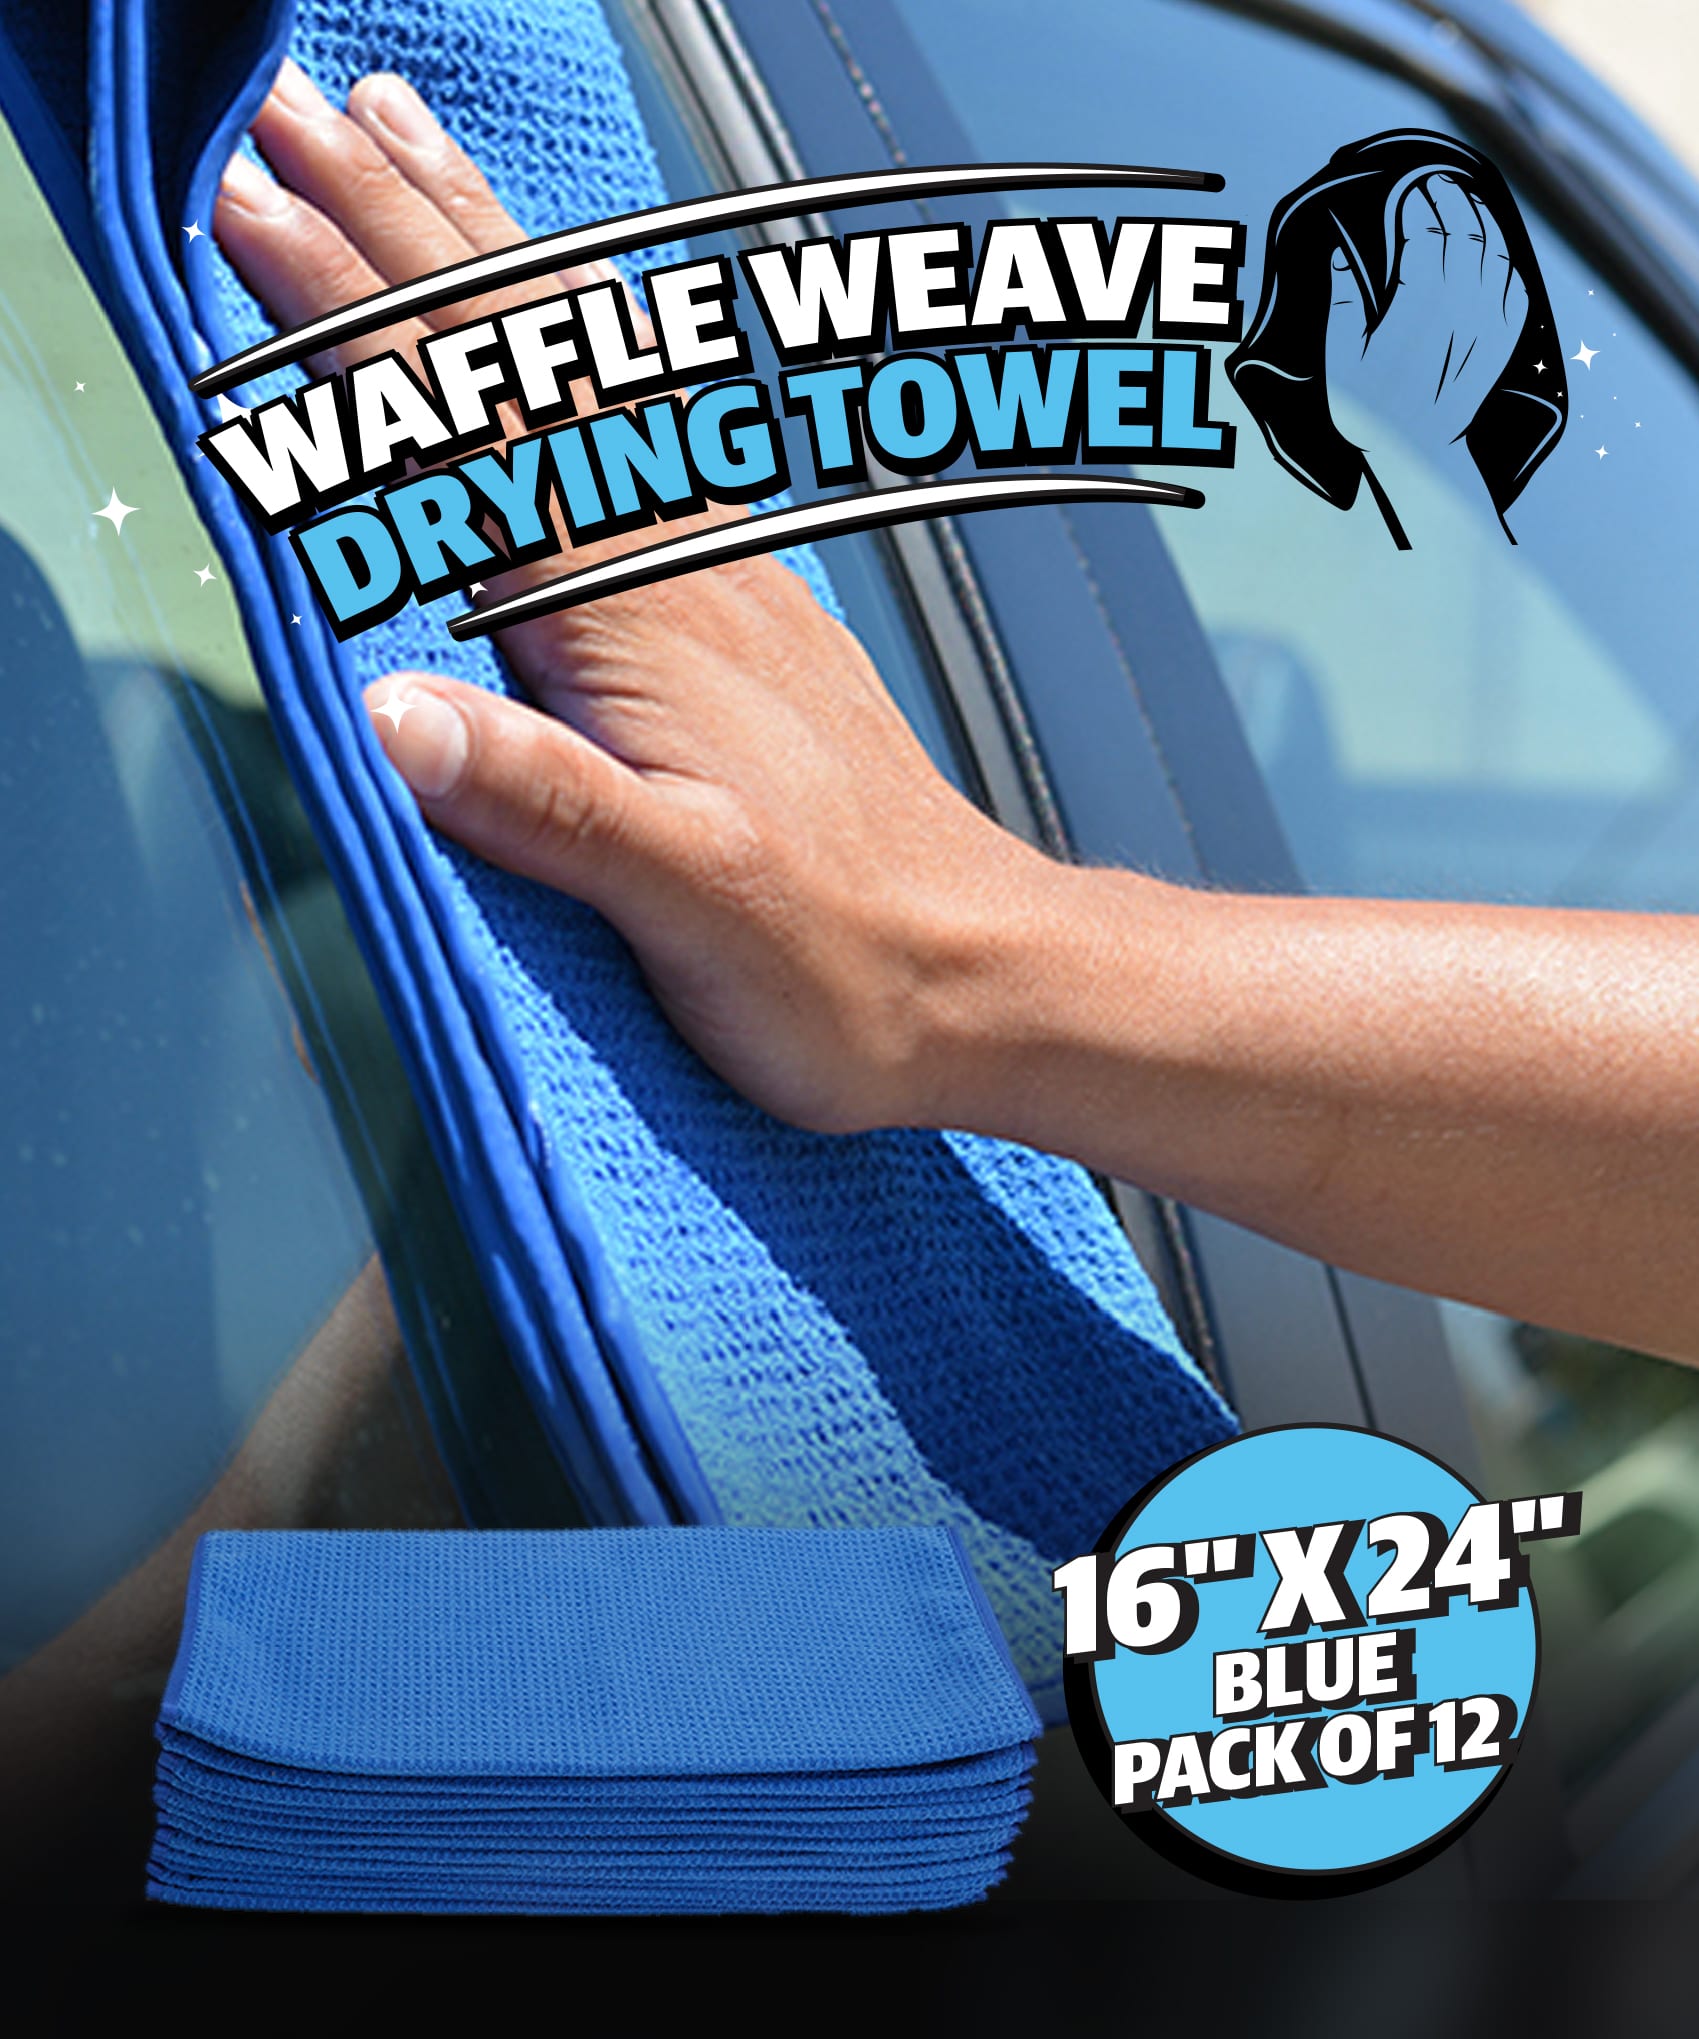 Waffle Weave Glass Towel 16" x 24" Blue - Each or Pack of 12